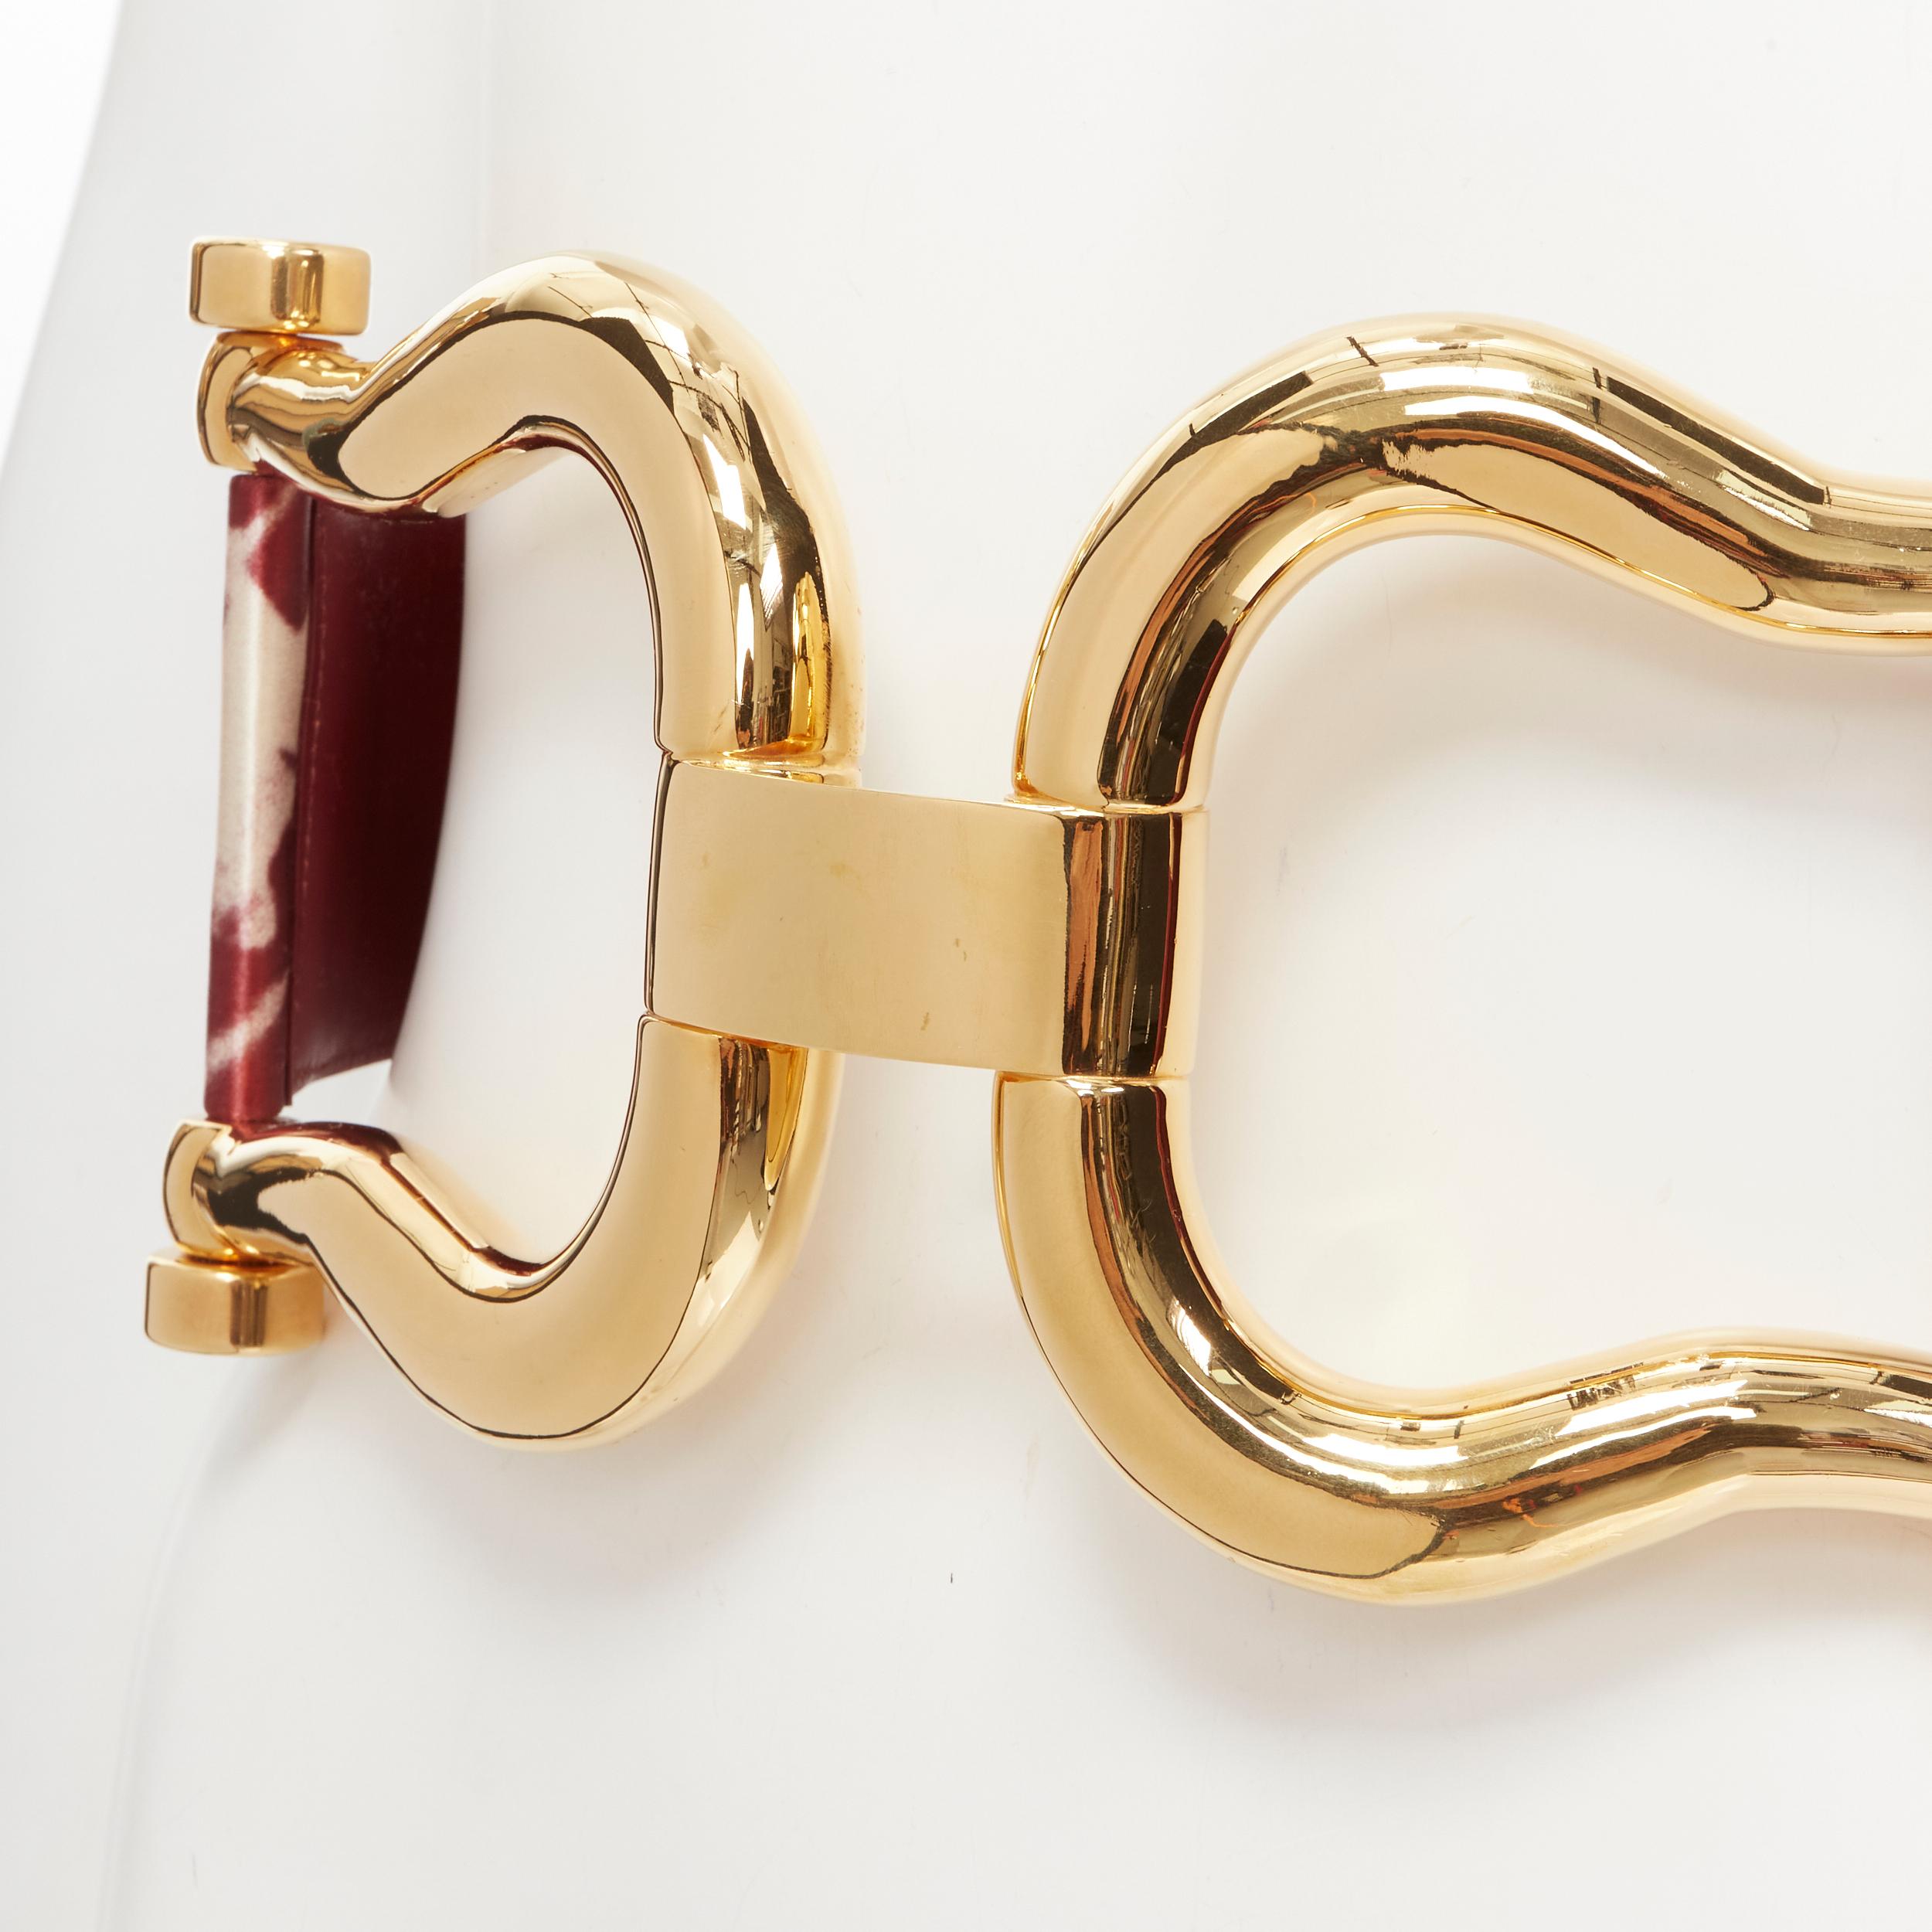 new CELINE Phoebe Philo 2018 Runway Sulky Satin gold horsebit buckle wide belt S 
Reference: TGAS/B01997 
Brand: Celine 
Designer: Phoebe Philo 
Collection: Spring Summer 2018 Runway 
Material: Satin 
Color: Burgundy 
Pattern: Abstract 
Closure: